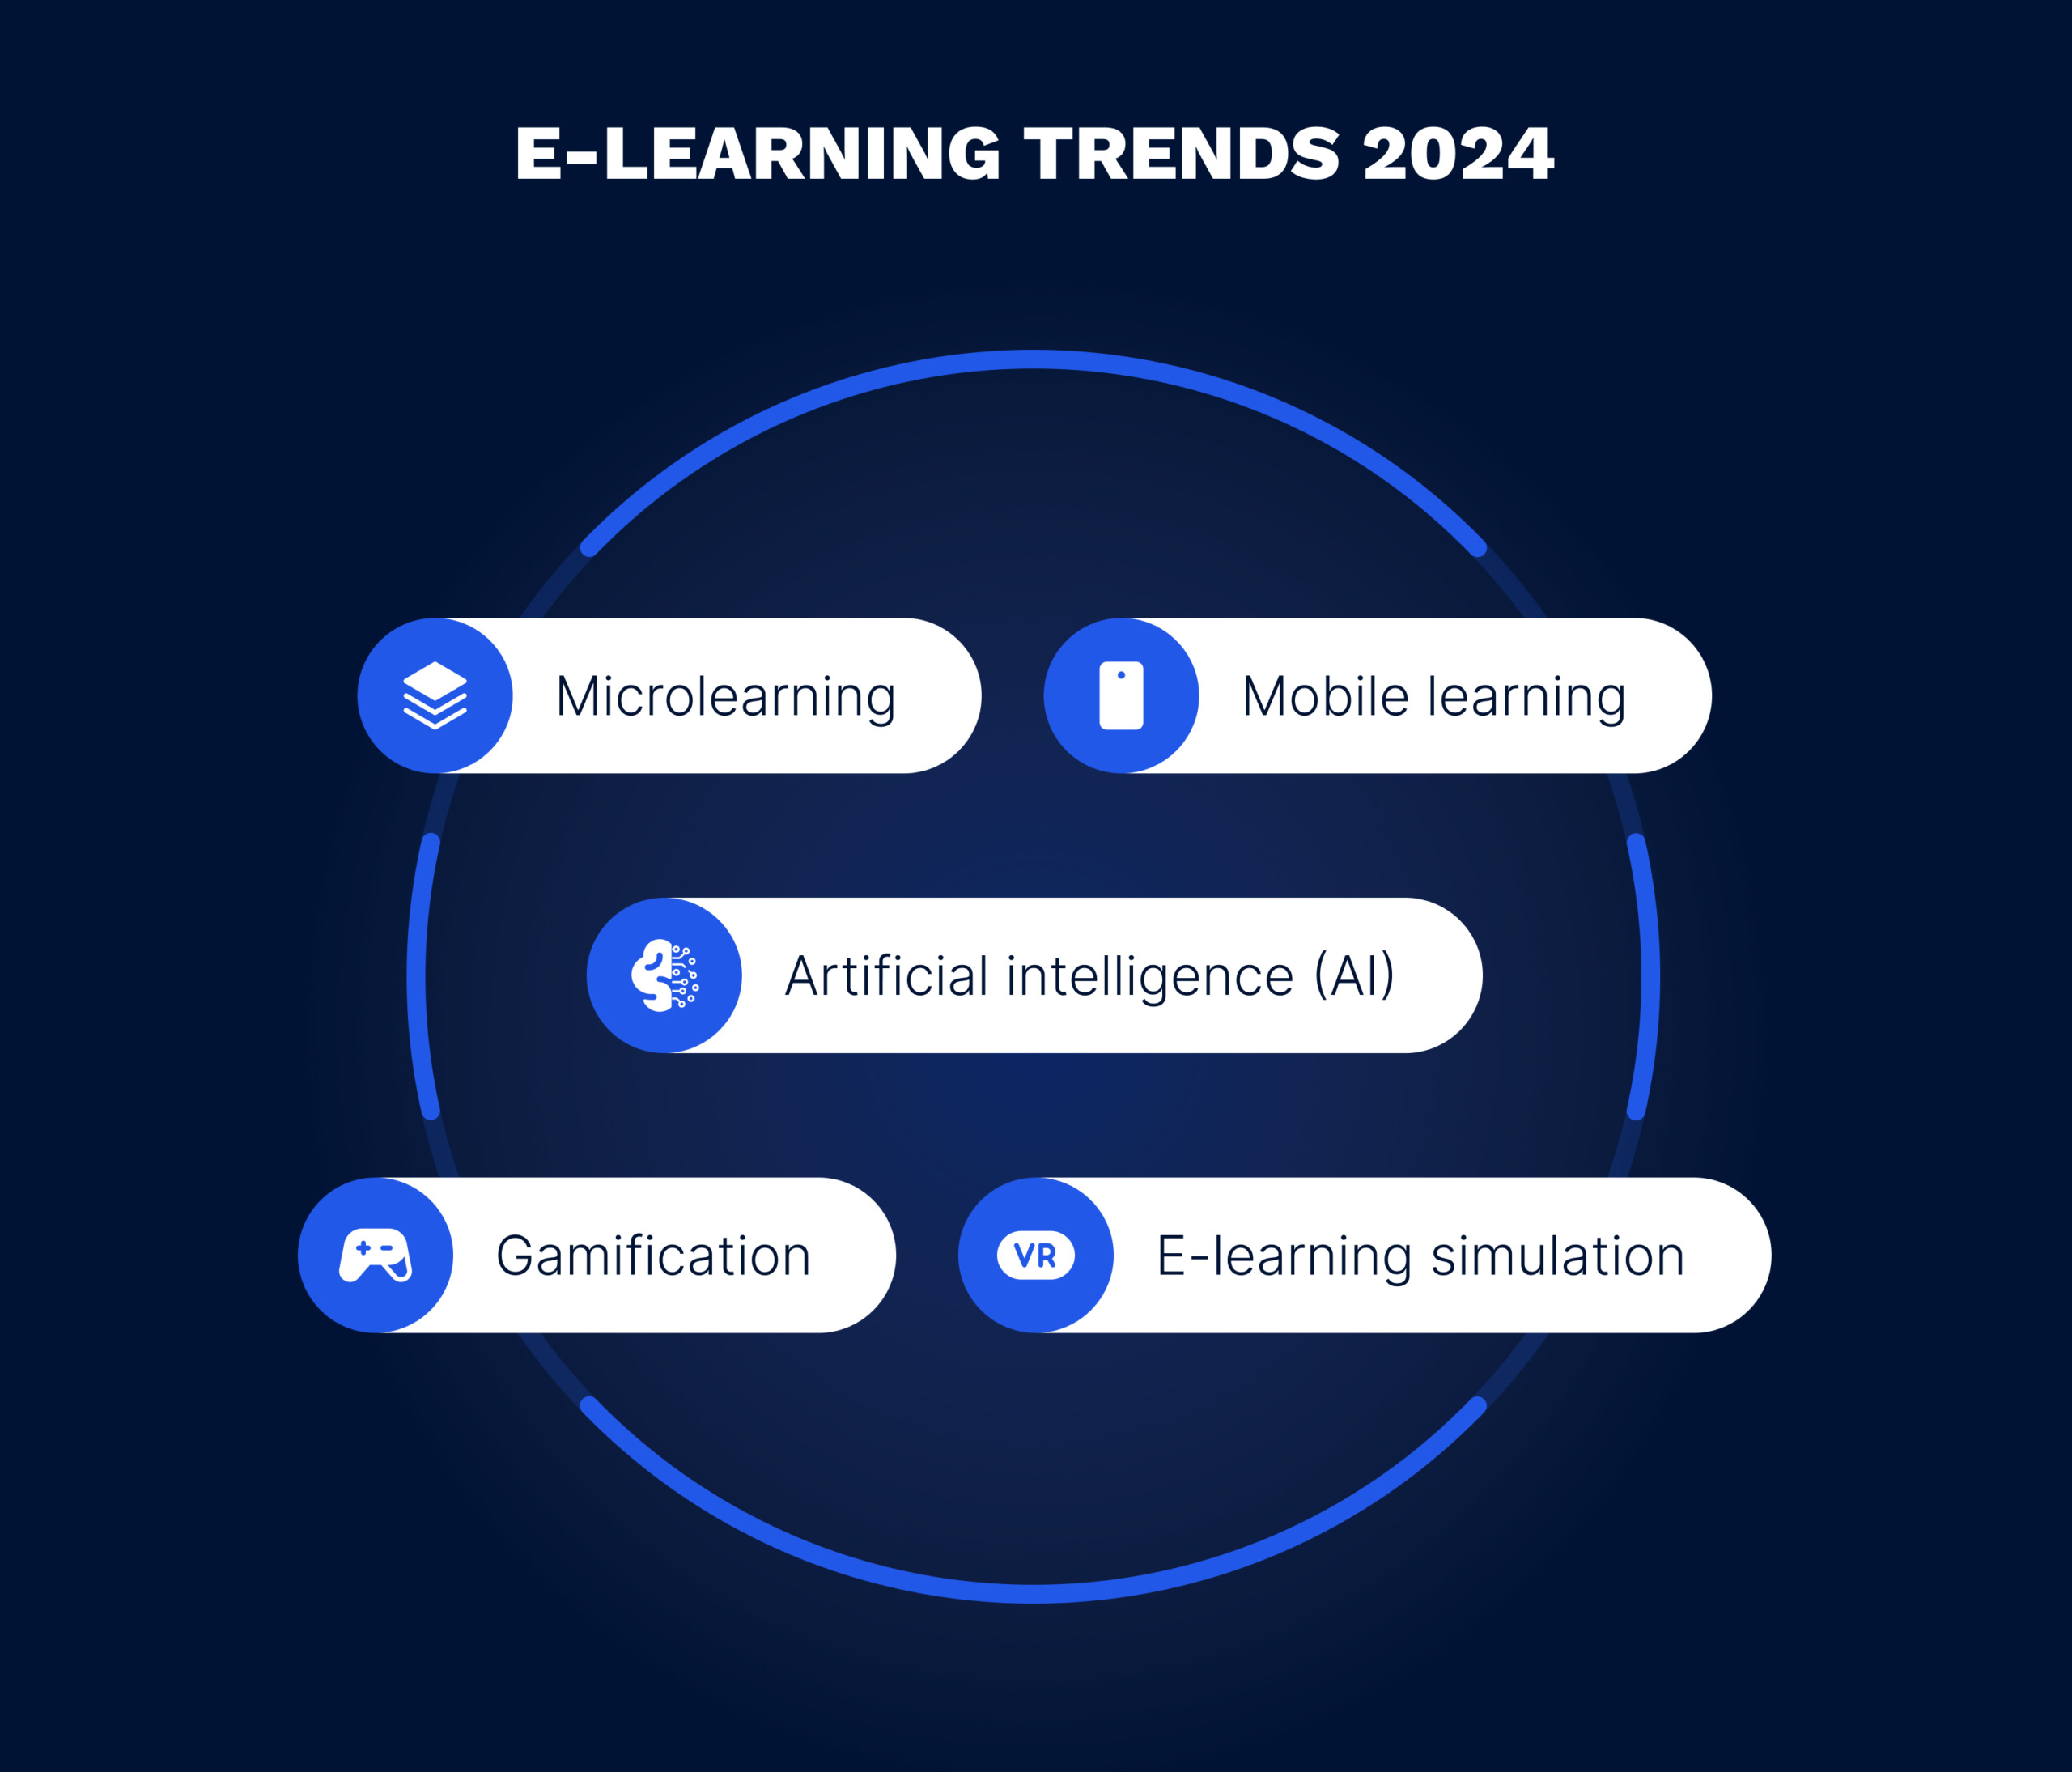 Top e-learning trends for 2024